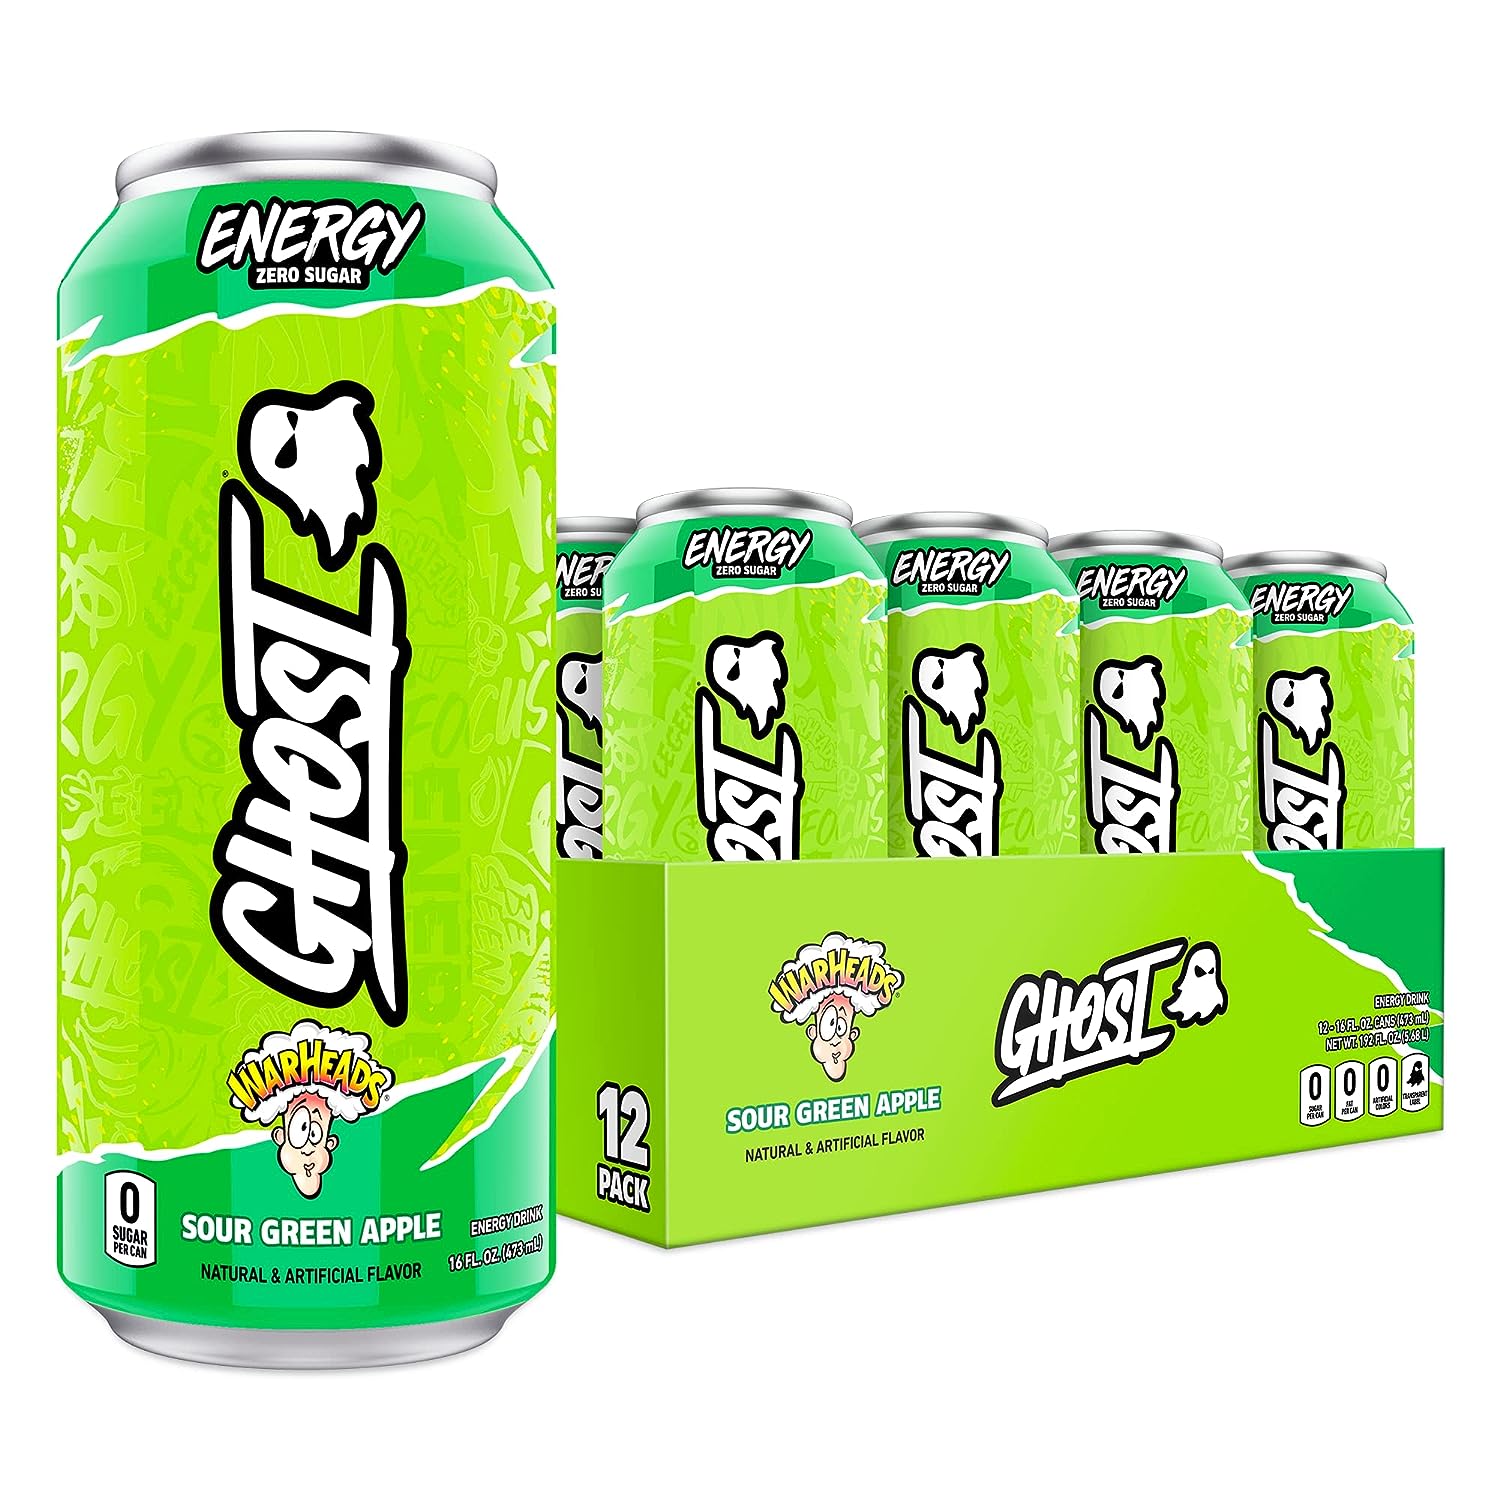 GHOST Energy Drink (1 case of 12 cans) Protein Snacks Sour Green Apple GHOST